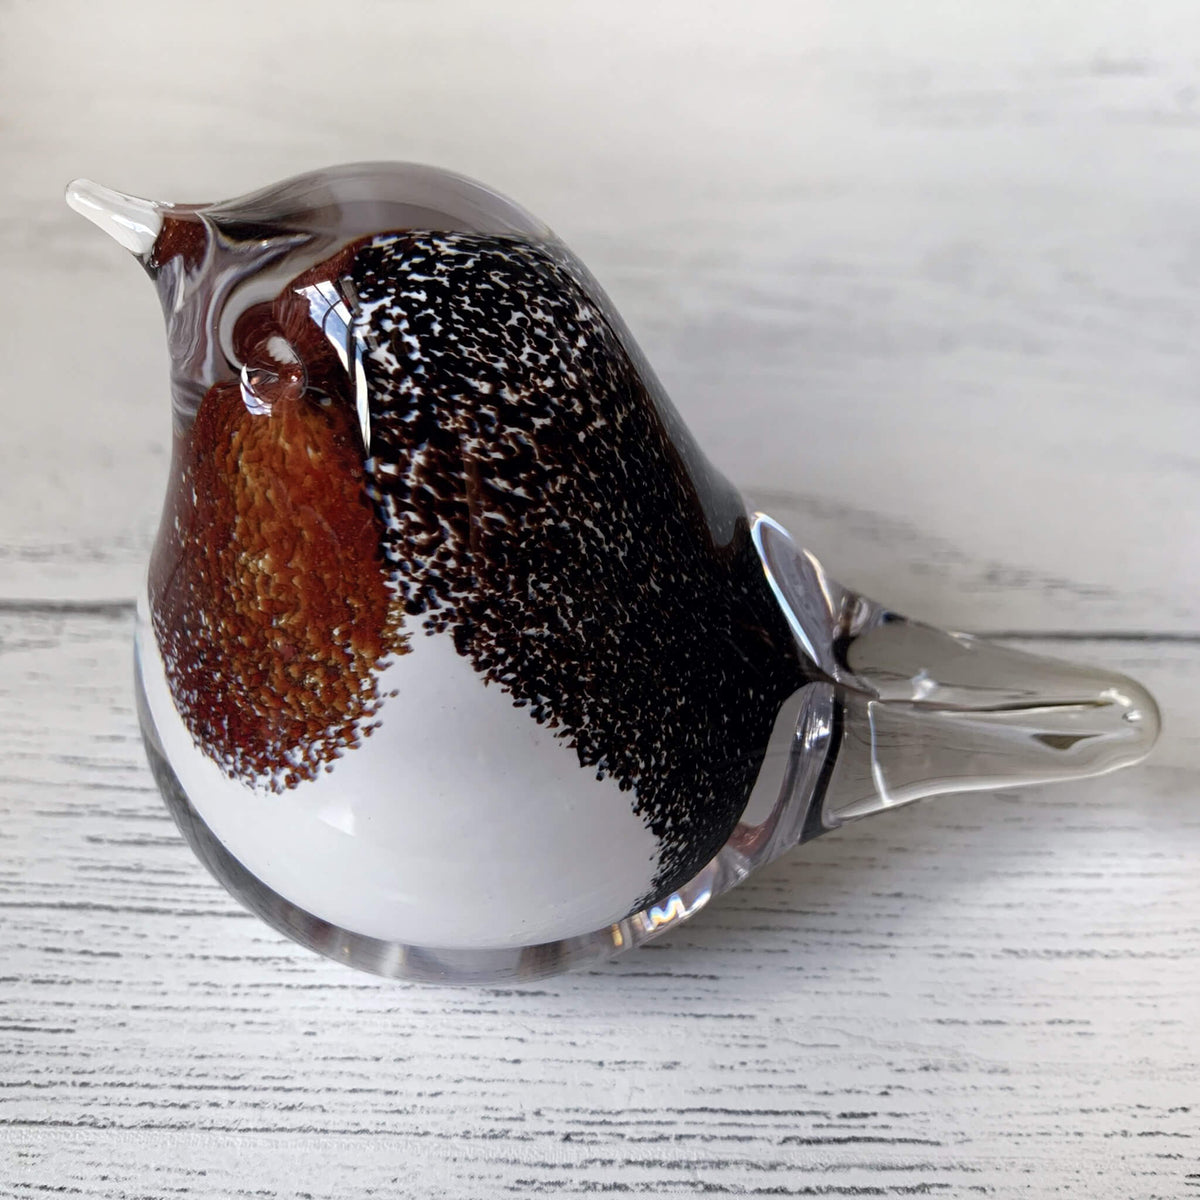 Handmade fused glass Robin ornament, with smooth glass shape and speckle details. 